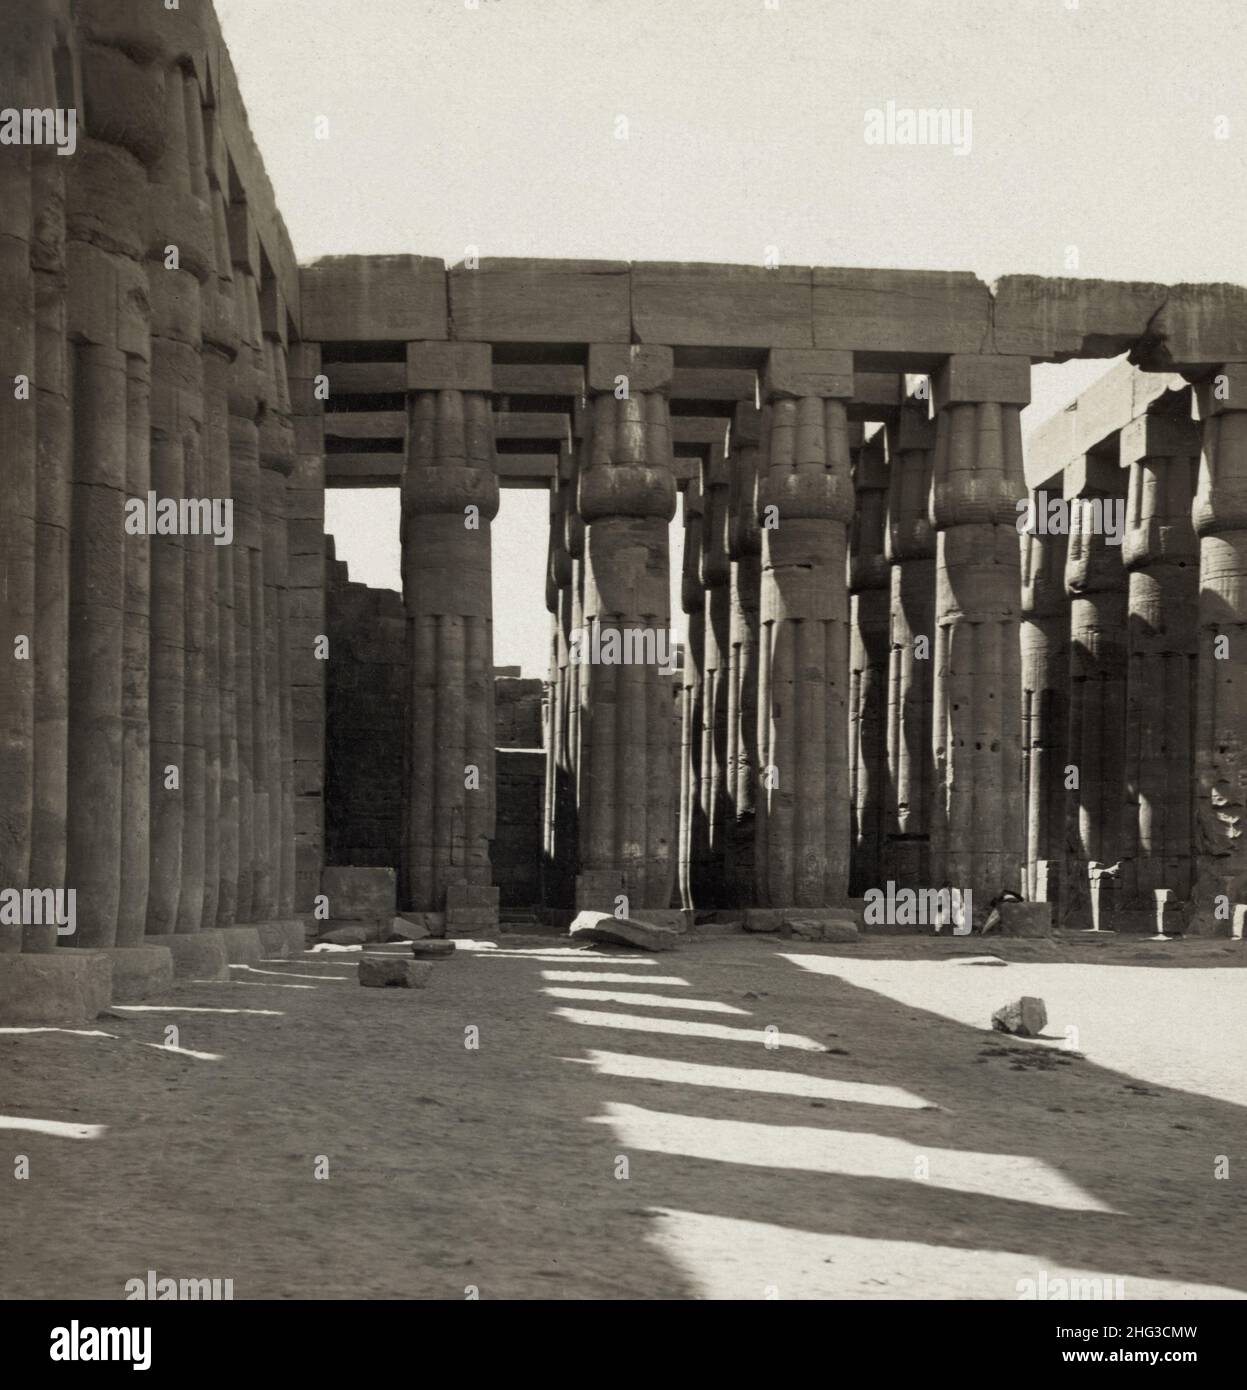 Ancient Egypt. The Empire period. Court C. Temple of Luxor, Egypt. 1900s Stock Photo